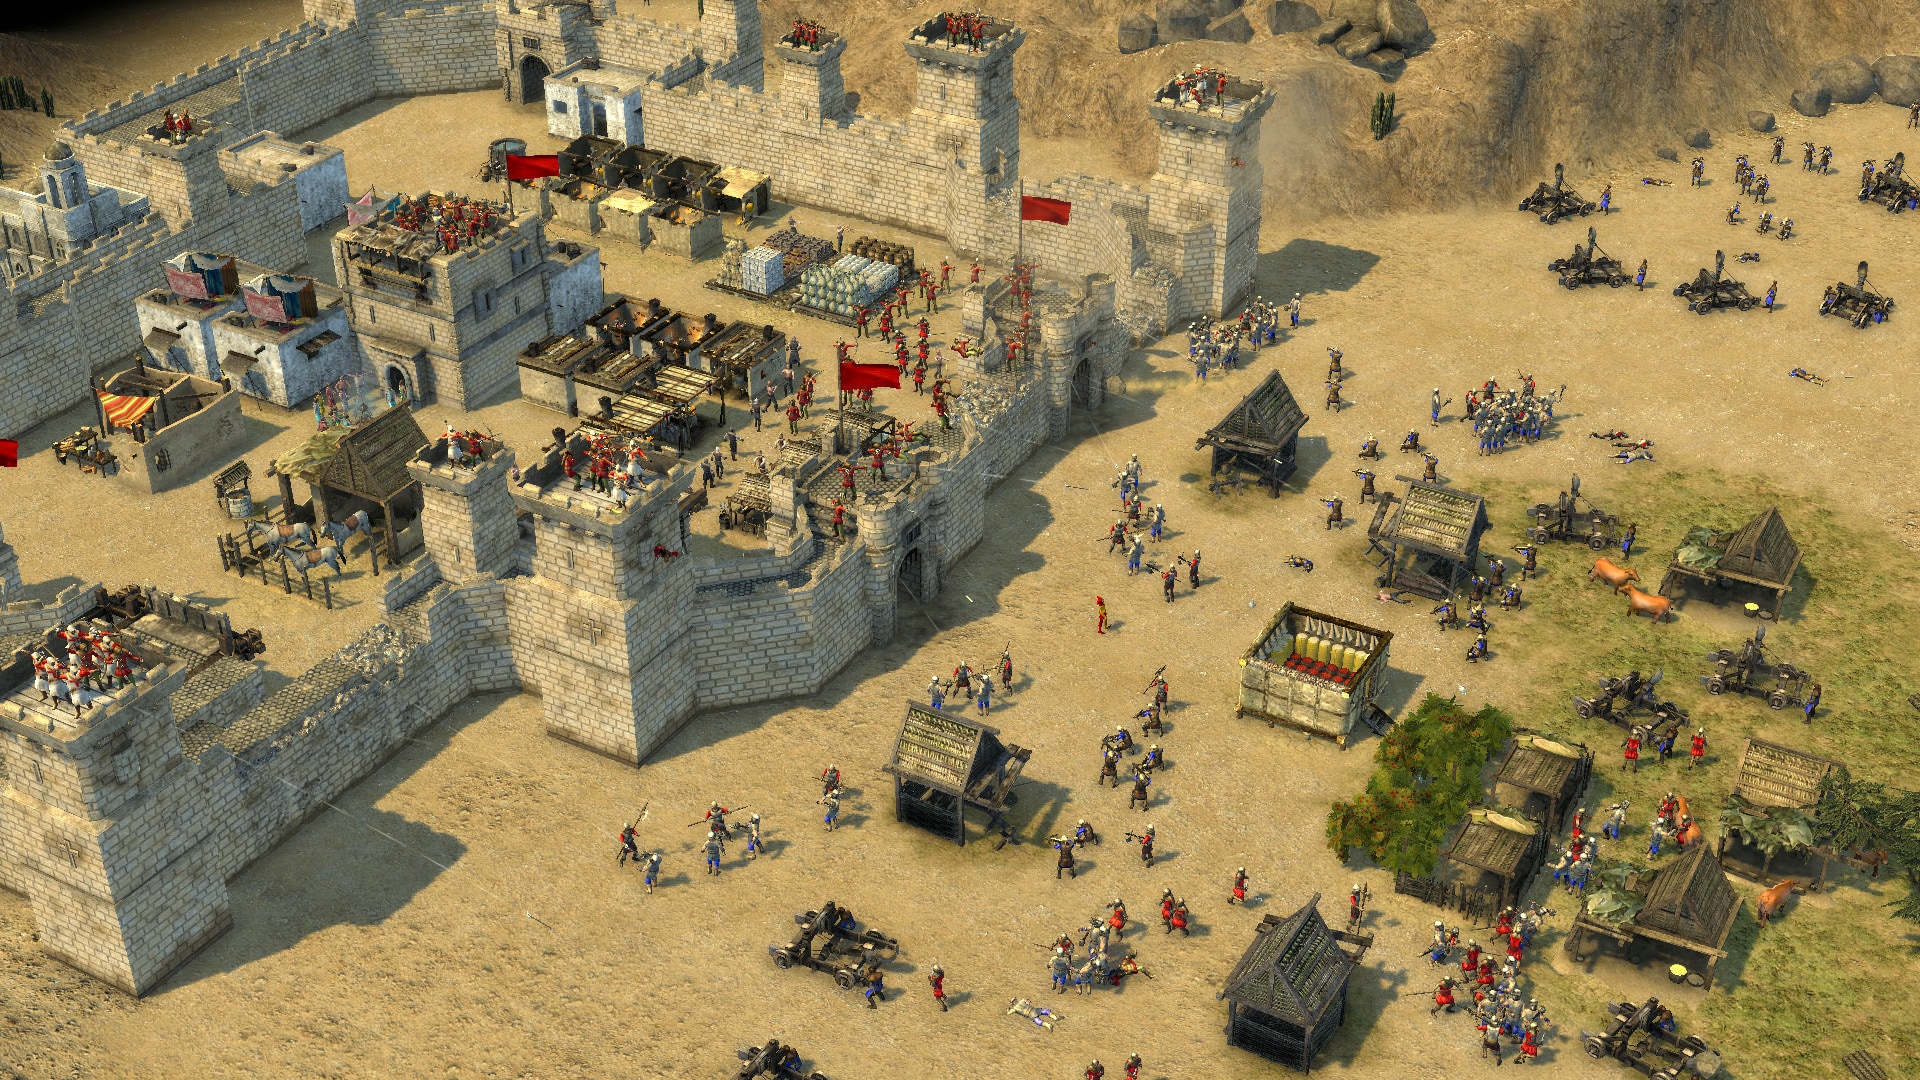 Stronghold Crusader 2 - The Princess and The Pig Steam Key GLOBAL - 1